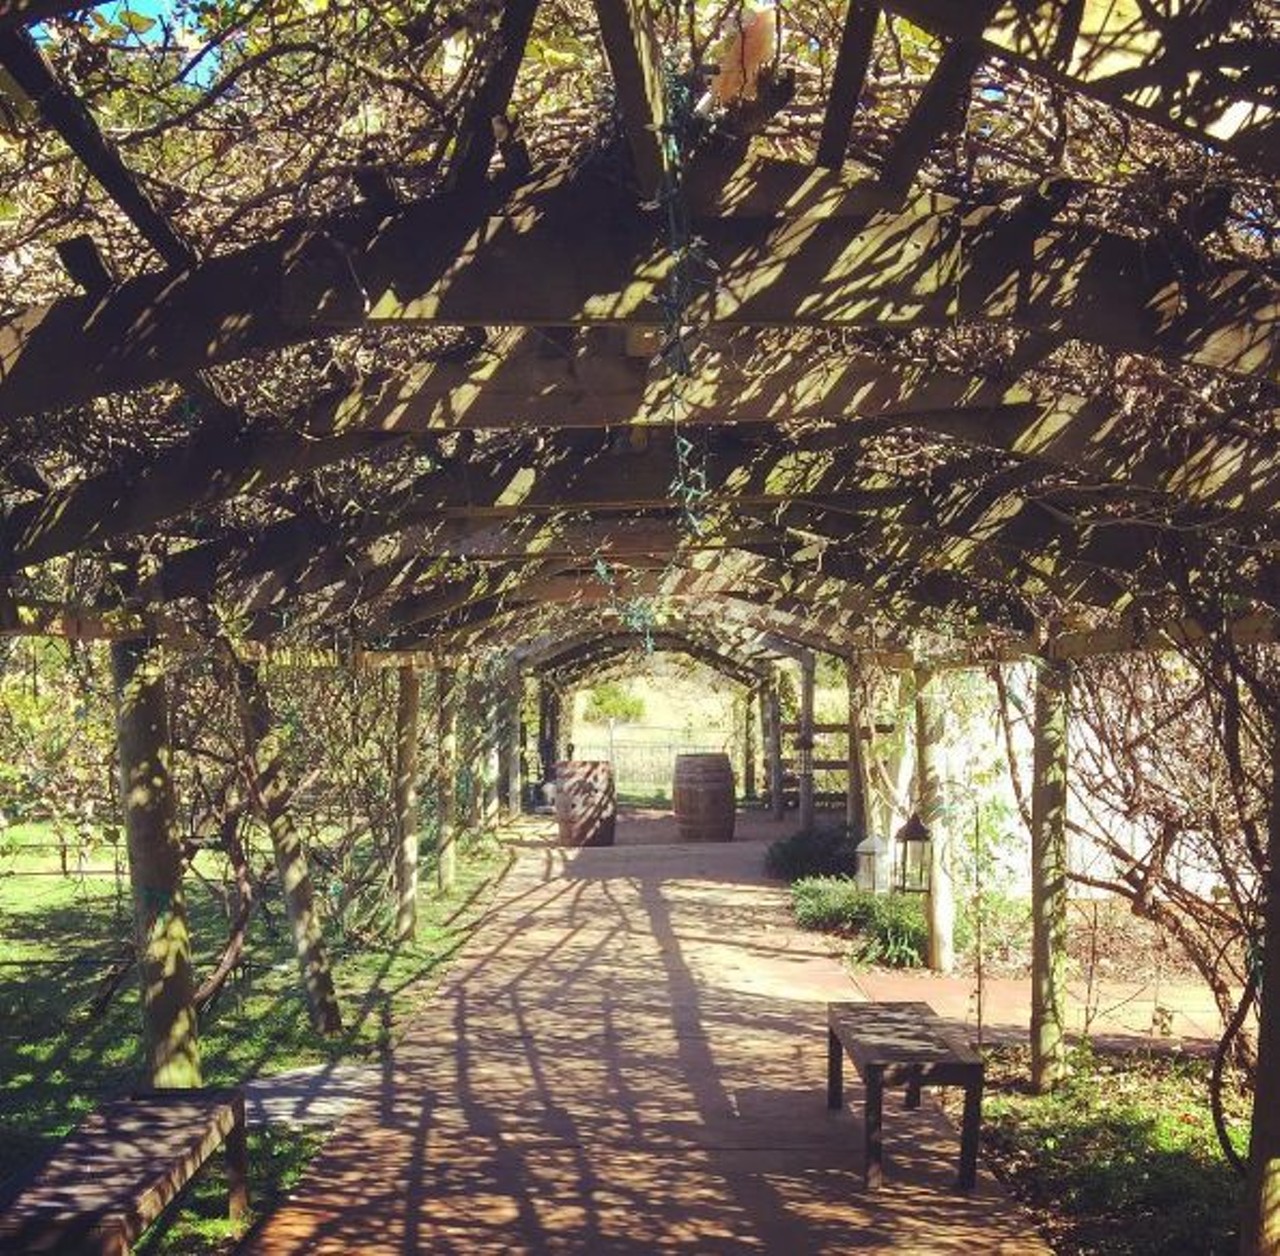 Oak Valley Vineyards
You don&#146;t need to be a wine-lover to have your picture perfect wedding here. Choose to tie the knot at the pavilion, framed by the tree branches, or just about anywhere on site.
27315 FM3009, San Antonio, oakvalleyvineyardsrestaurant.com
Photo via Instagram, pizzatariana